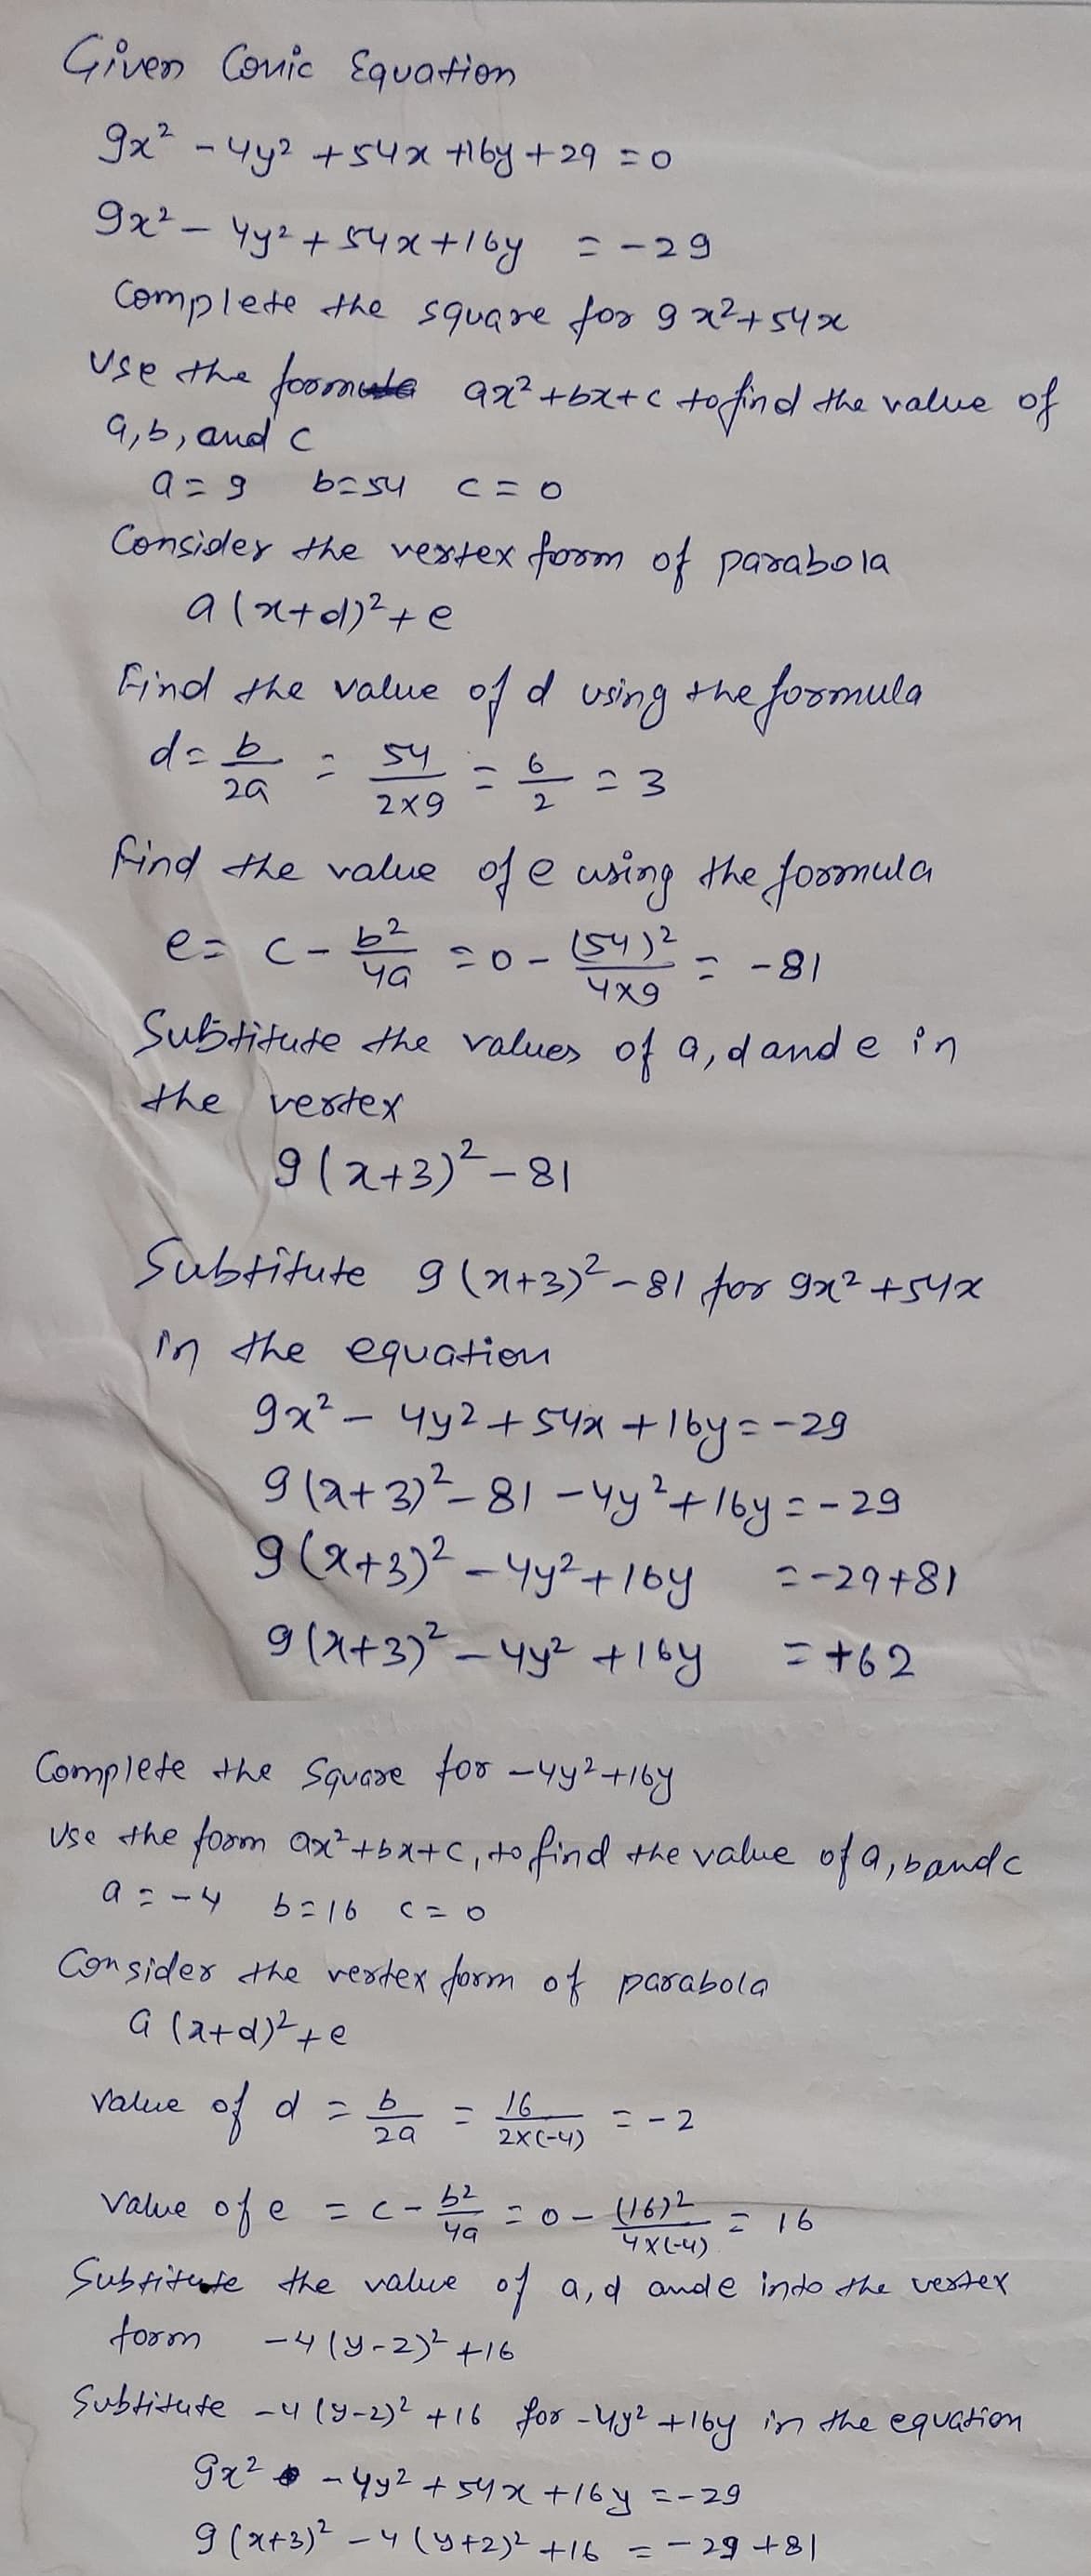 Given Conic Equation
9x² - 4y² +54x +16y +29 = 0
9x² - 4y² + 54x + 1by = -29
Complete the square for 9x²+54x
foome 92²+bx+c to find.
Use the
a, b, and c
a=9
6=54
Consider the vertex form of parabola
a(x+d)² + e
Find the value
da b
29
2
54
2x9
b2
पव
Value
CHO
of d using the
=
Find the value of e using the formula
е
e= c-
20-(54)2
value of e
9(2+3)²-81
= -81
4x9
Subtitute the values of a, dande in
the vertex
of d = 5/20₁
b
29
1/2
2
Subtitute 9(2+3)²-81 for 9x² +54x
in the equation
to find the value of
9x² - 4y² +54x + 16y=-29
9(2+3) ²2²-81-4y² + 16y = -
9 (x+3)² - 4y²+1by
9(x+3)² - 4y² +1by
C=O
= C-
= 3
Complete the Square for _4y² +167
Use the form ax²+bx+c, to find the value of a, band c
a = - 4
b=16
Consider the vertex form of parabola
G (a+d)² + e
=
e formula
52
49
16
2X (-4)
= -2
=-29+8)
= +62
(16)2
= 16
4 X (-4)
Subtitute the value of a, d ande into the vertex
form
-4(y-2)² +16
Subtitute -4 (9-2)² +16 for - 4y² +16y in the equation.
Gx² - 4y² + 54x+16y=-29
9 (x+3)² - 4(y + 2)² + 16 = -29+8|